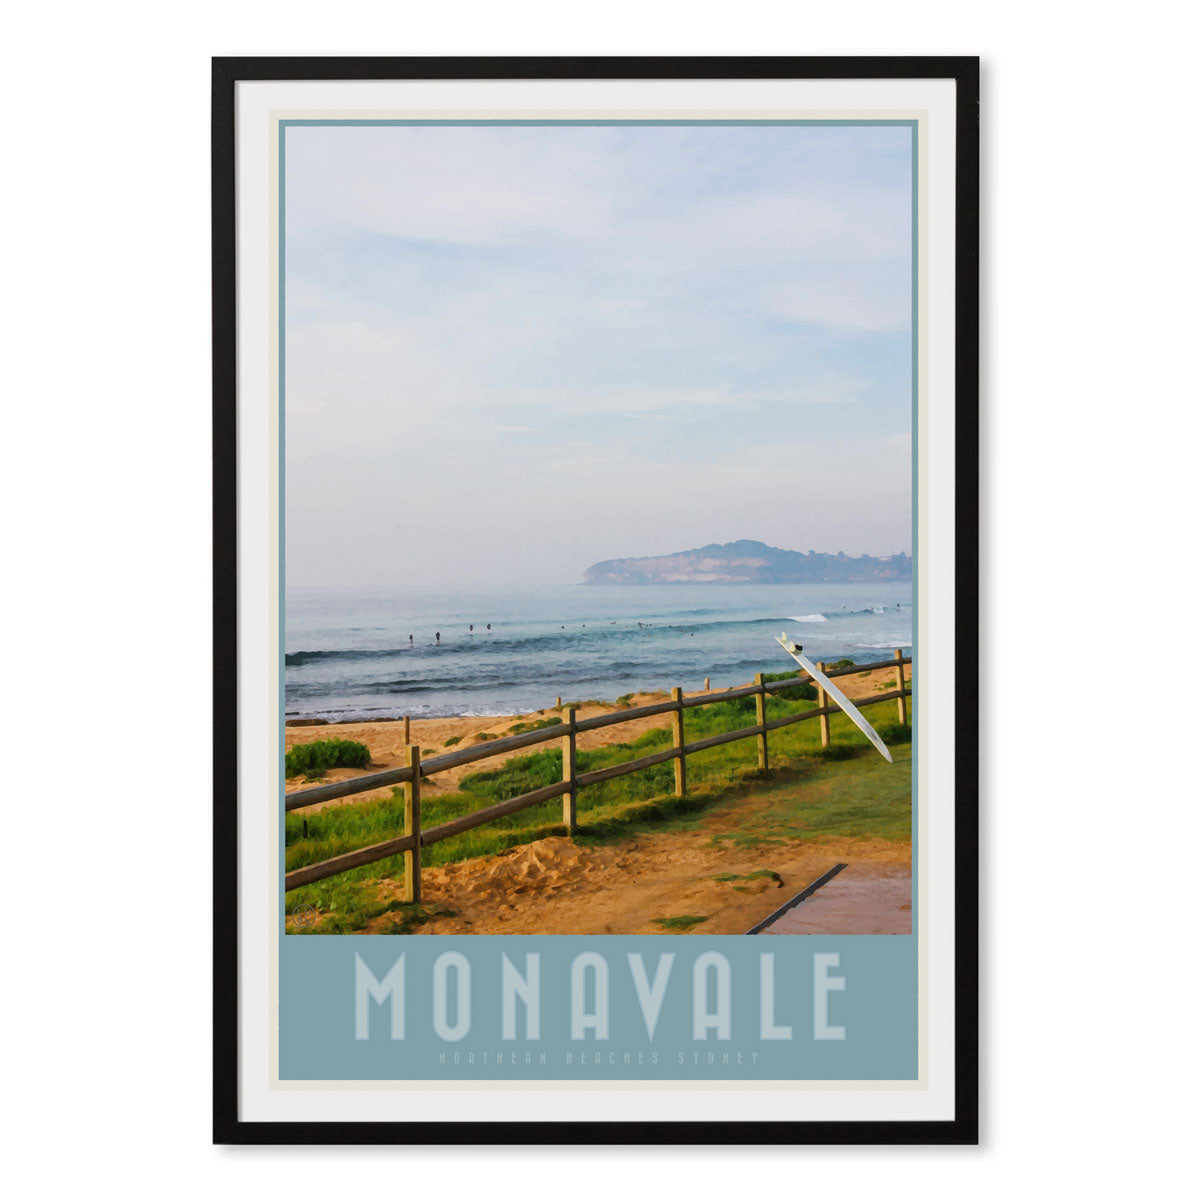 Mona Vale vintage travel style print by places we luv in black frame